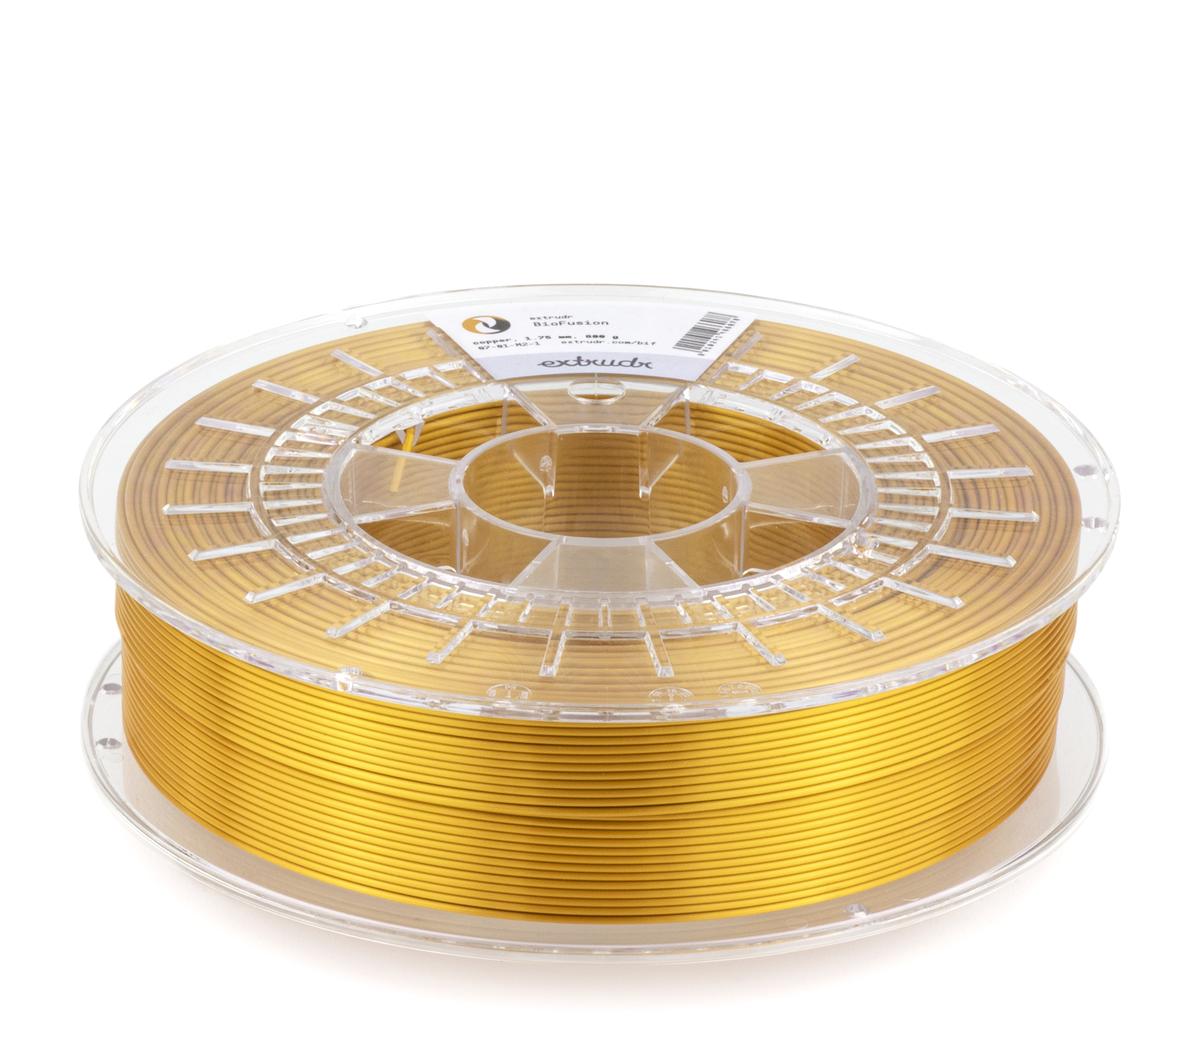 Extrudr BioFusion - Inca Gold [1.75mm] (31,13€/Kg)